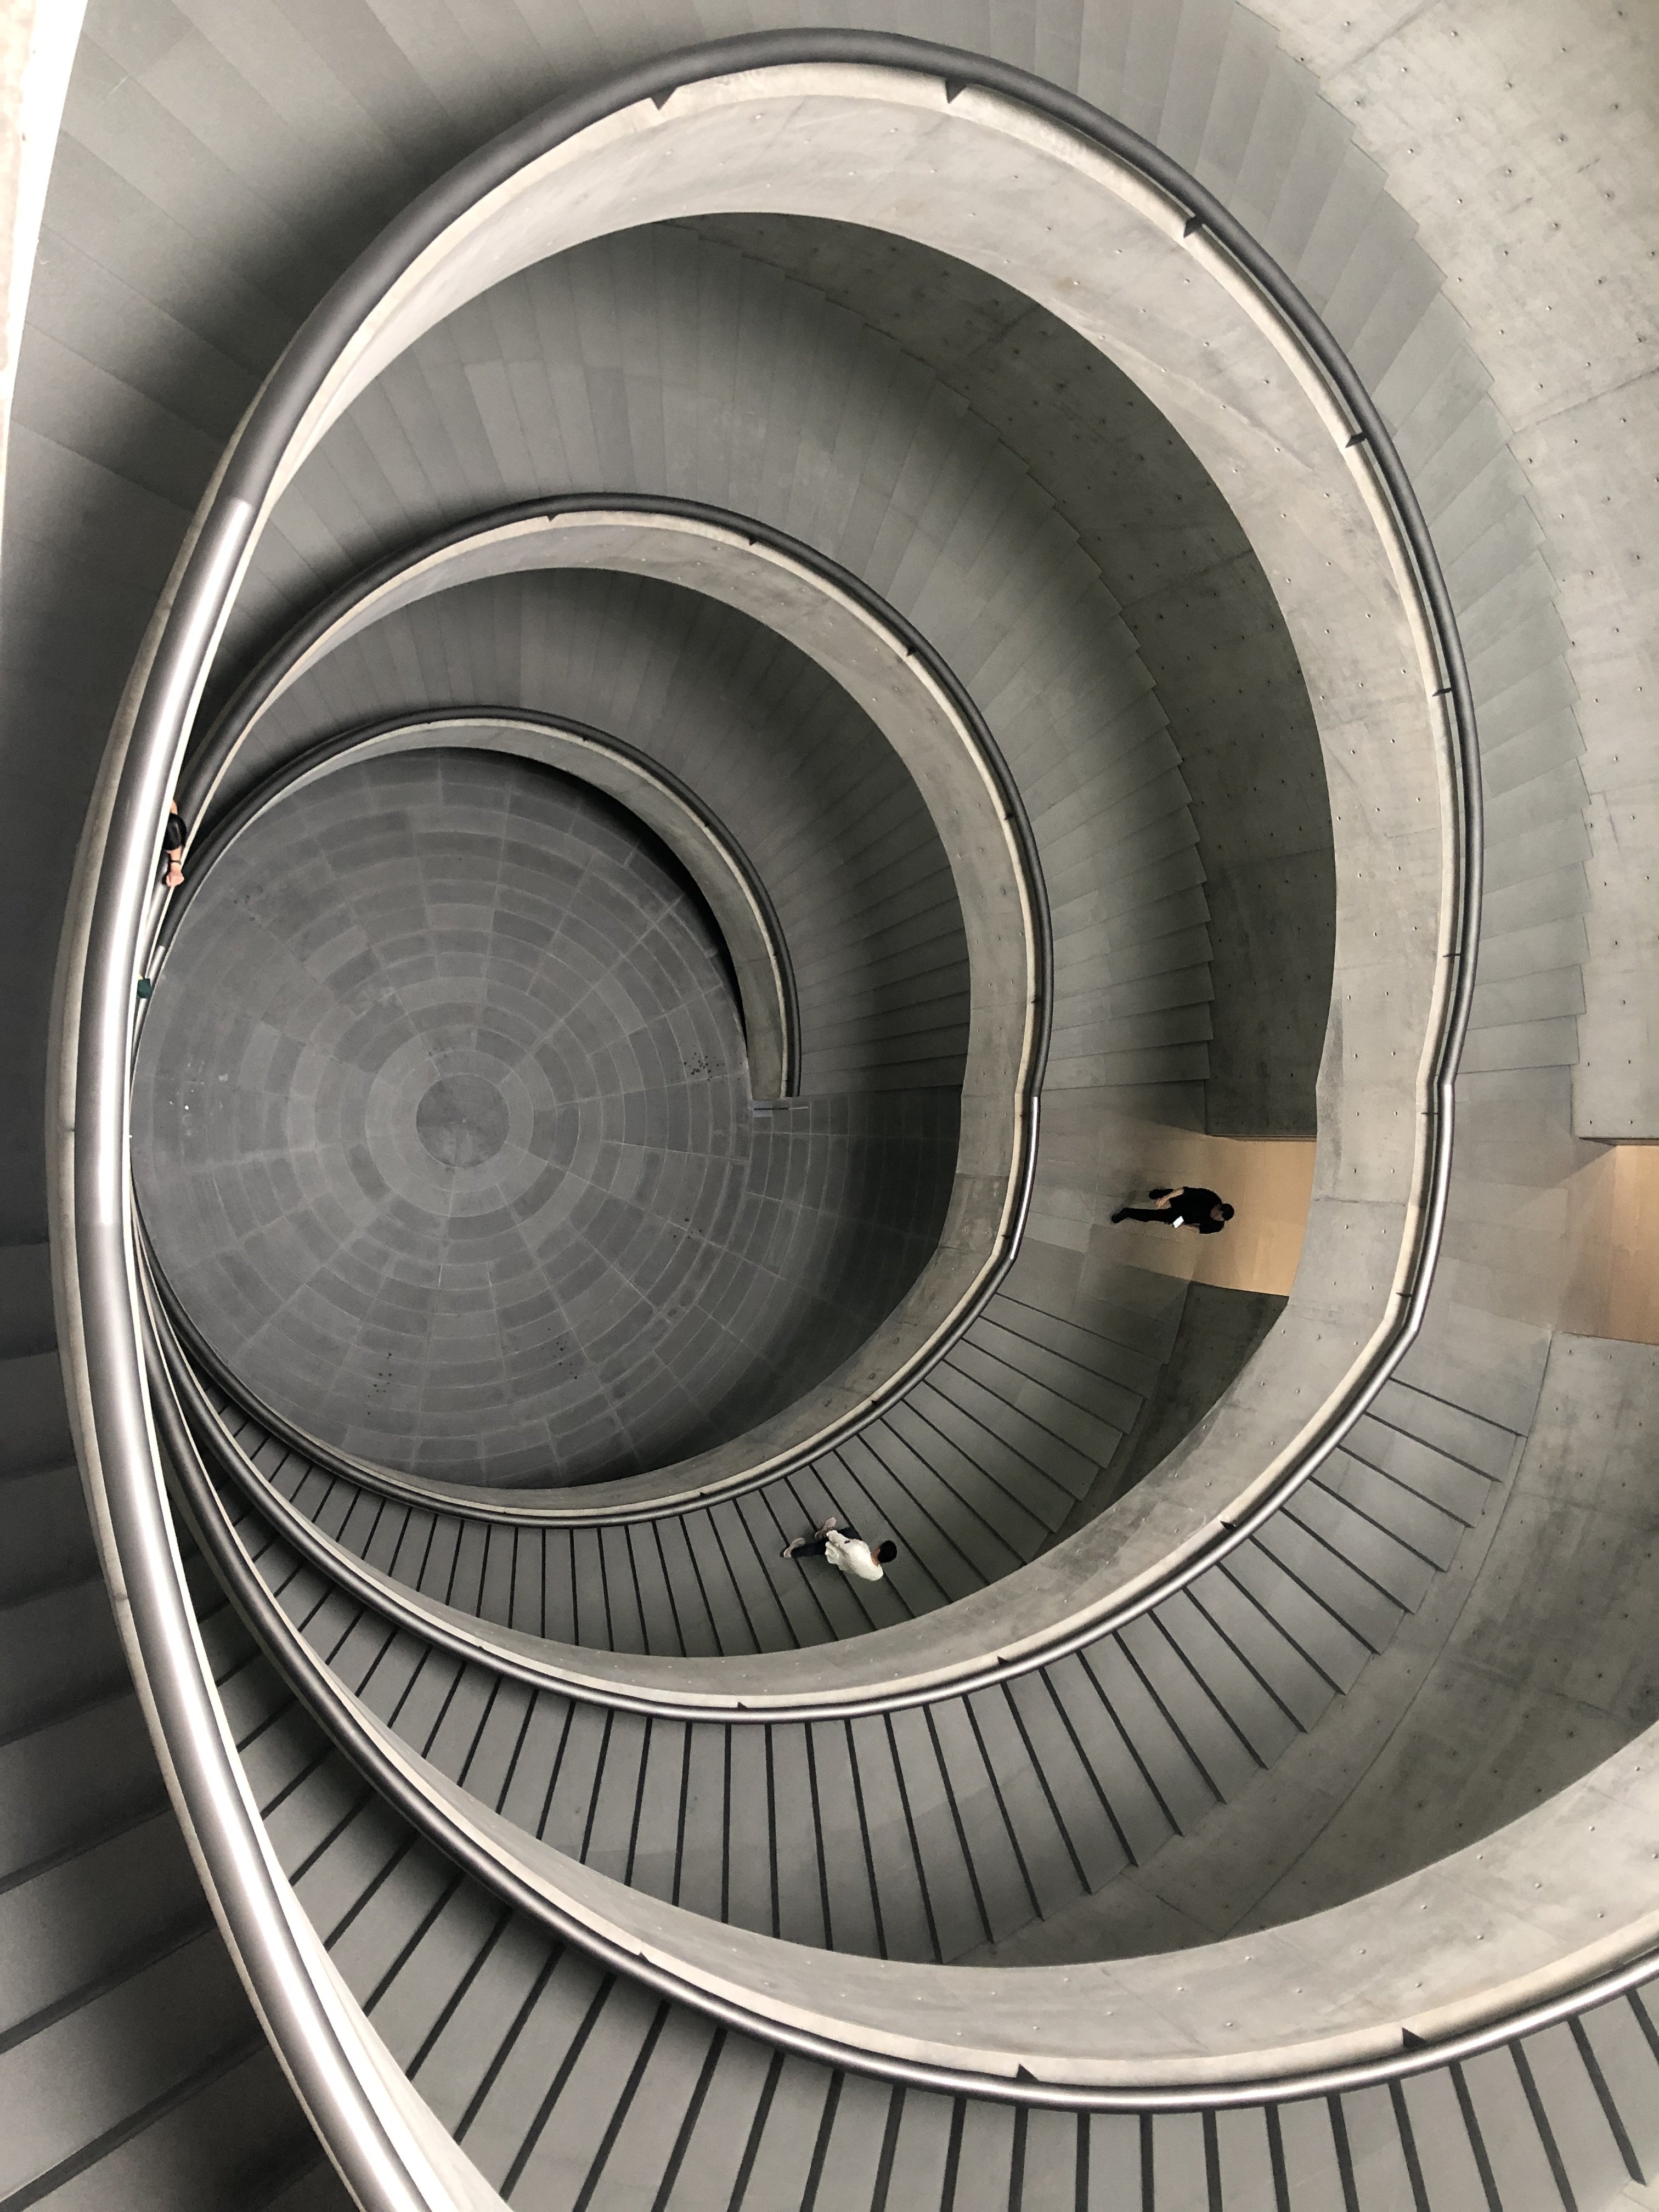 The “double helix” staircase of the Tadao Ando-designed He Museum in Shunde, Guangdong province. The private museum owned by the family behind Midea Group opened the biggest retrospective of Roni Horn in Asia on June 6, 2023 (Photo: Enid Tsui)